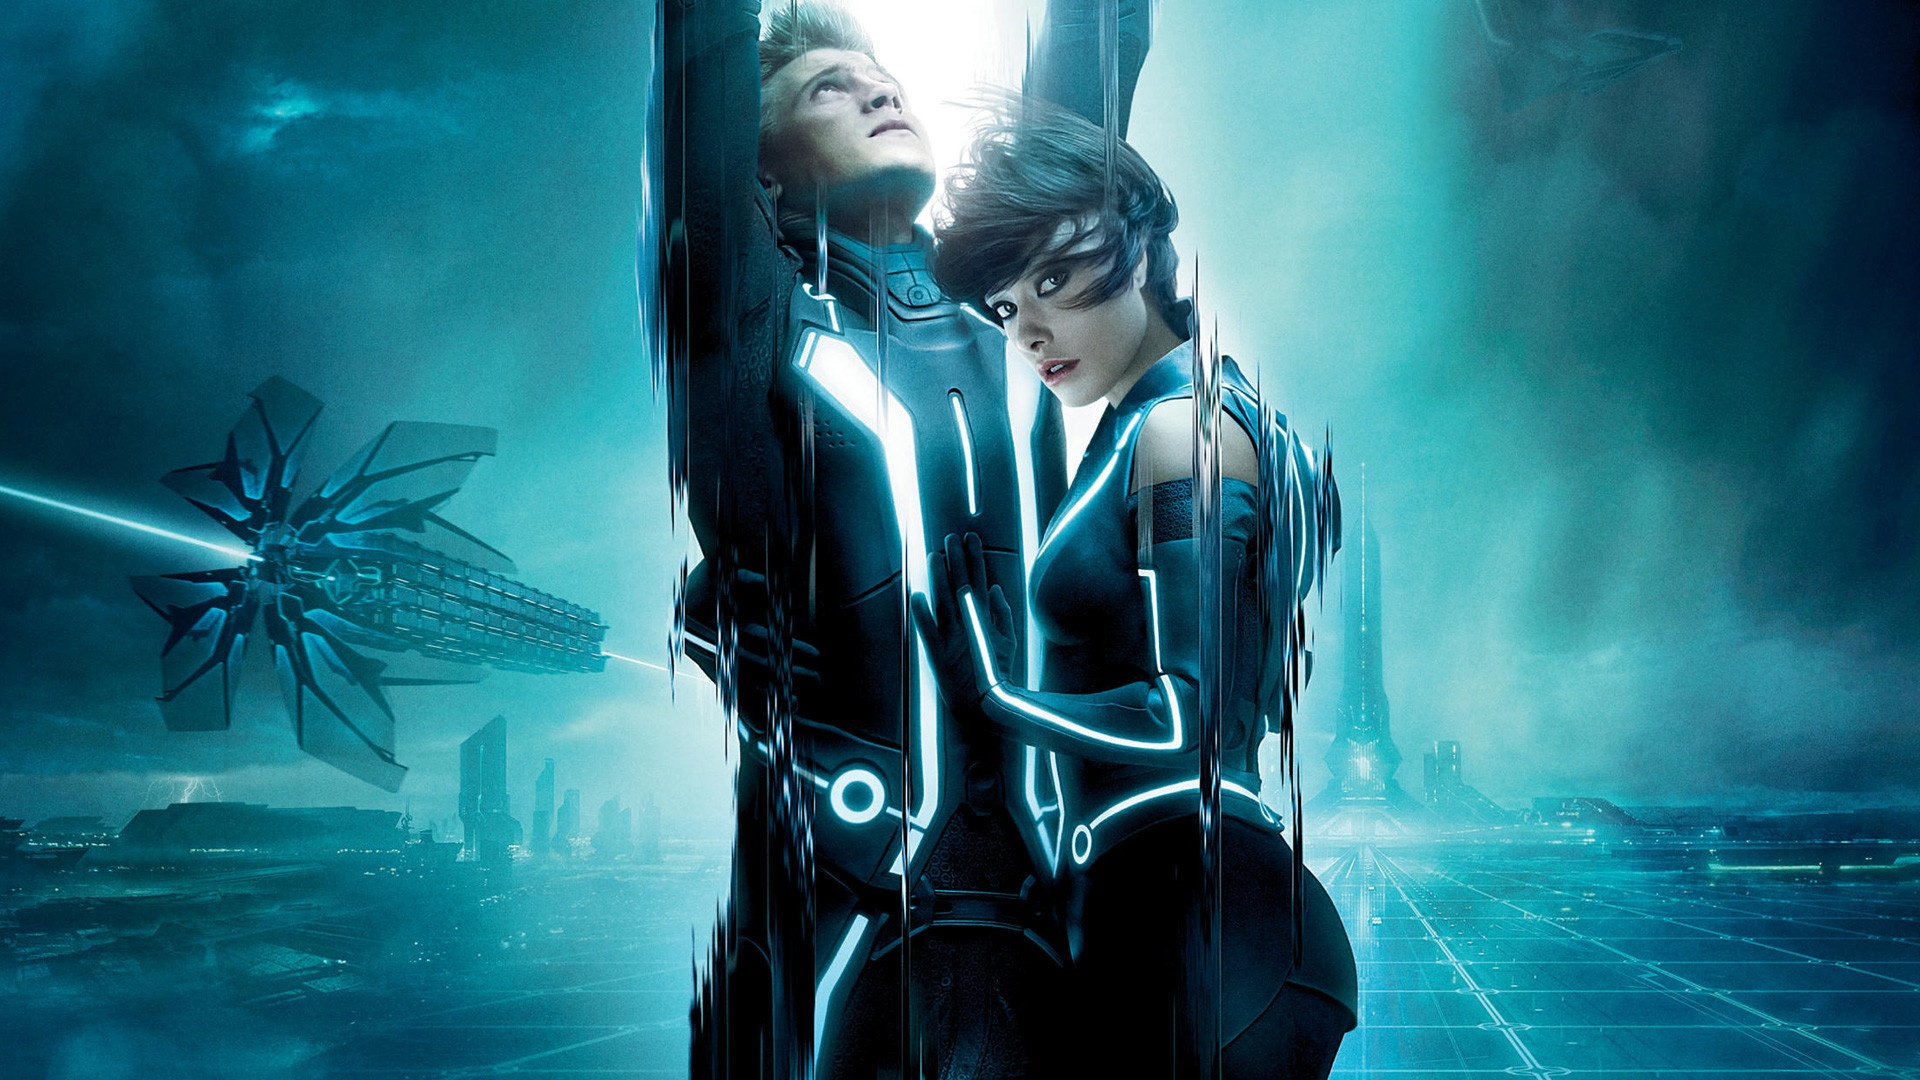 Tron Legacy 2010 Movie Wallpapers HD Wallpapers